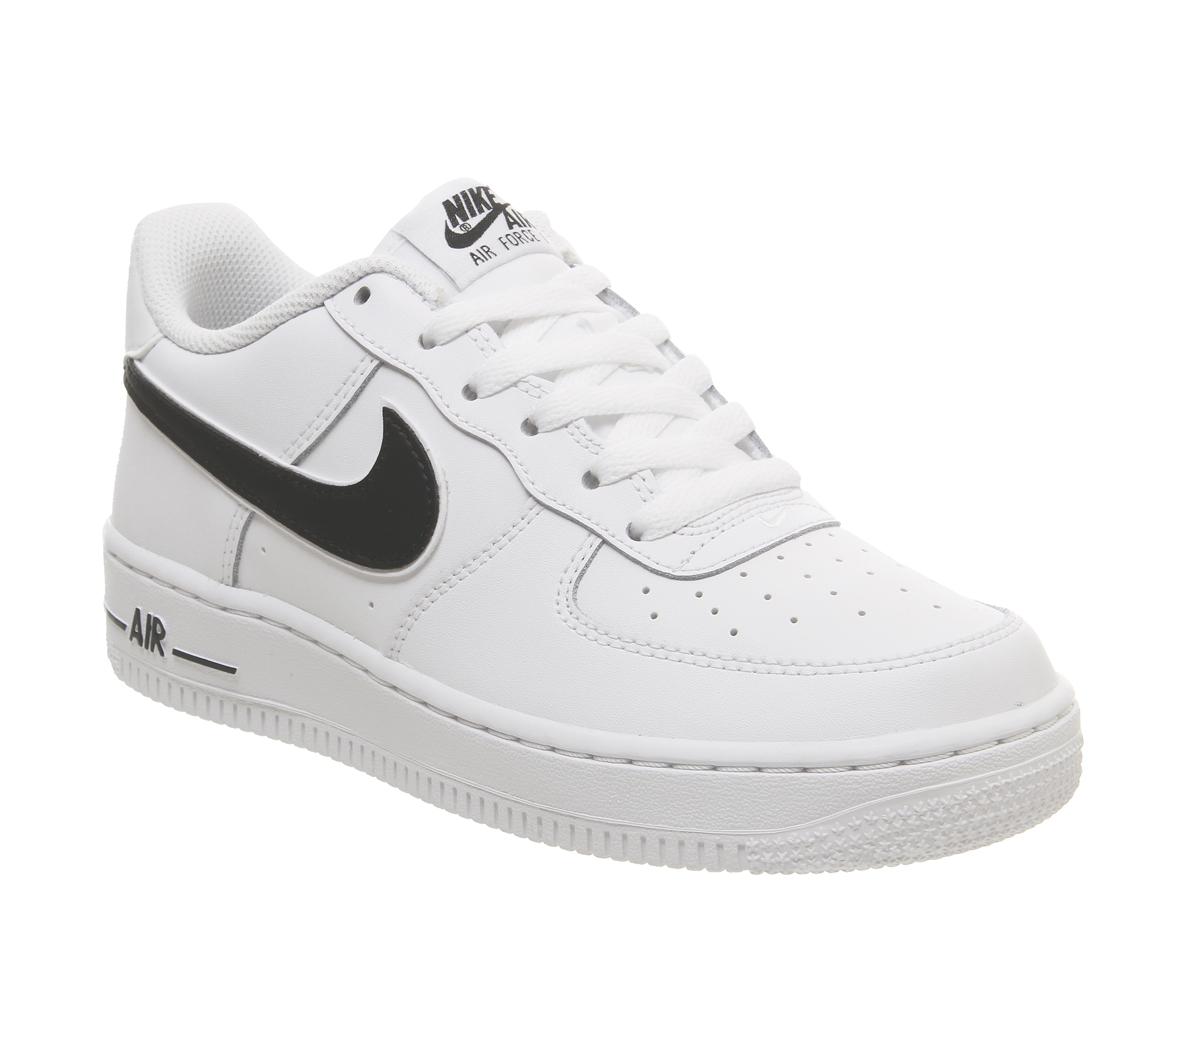 Nike Air Force 1 Junior Trainers White Black - Women's Trainers